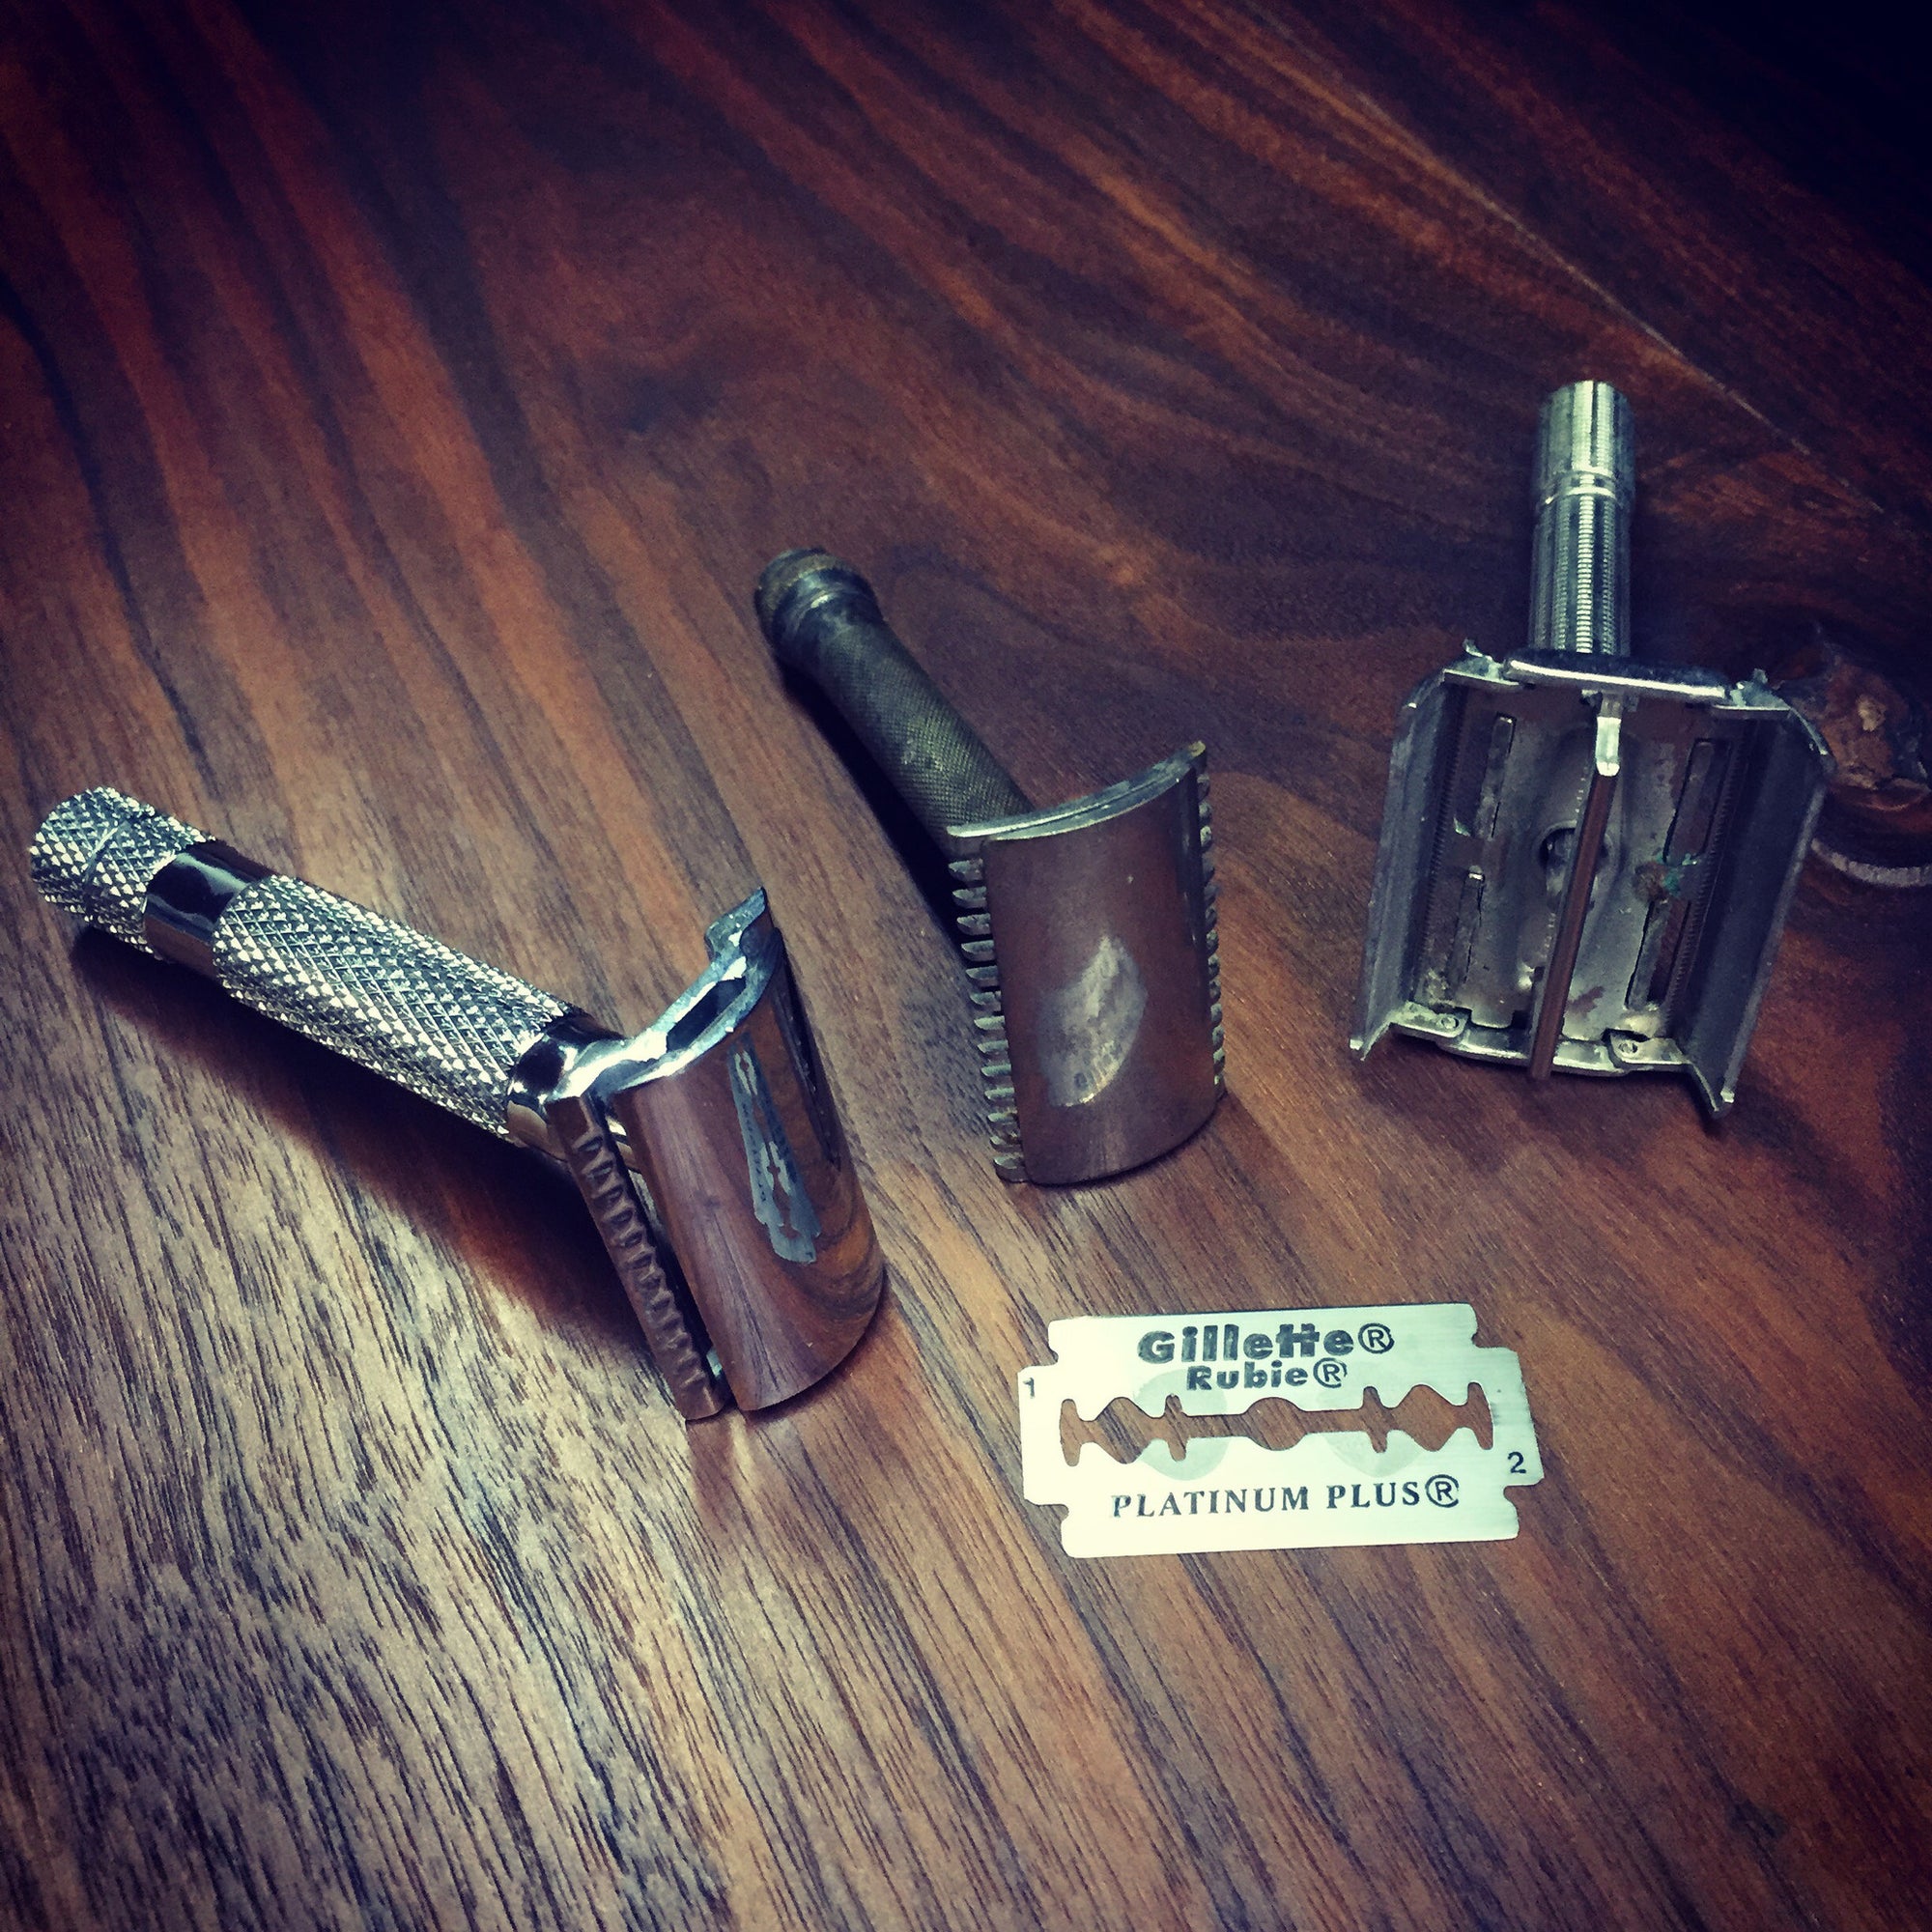 Where to buy a Safety Razor - How to pick a safety razor guide